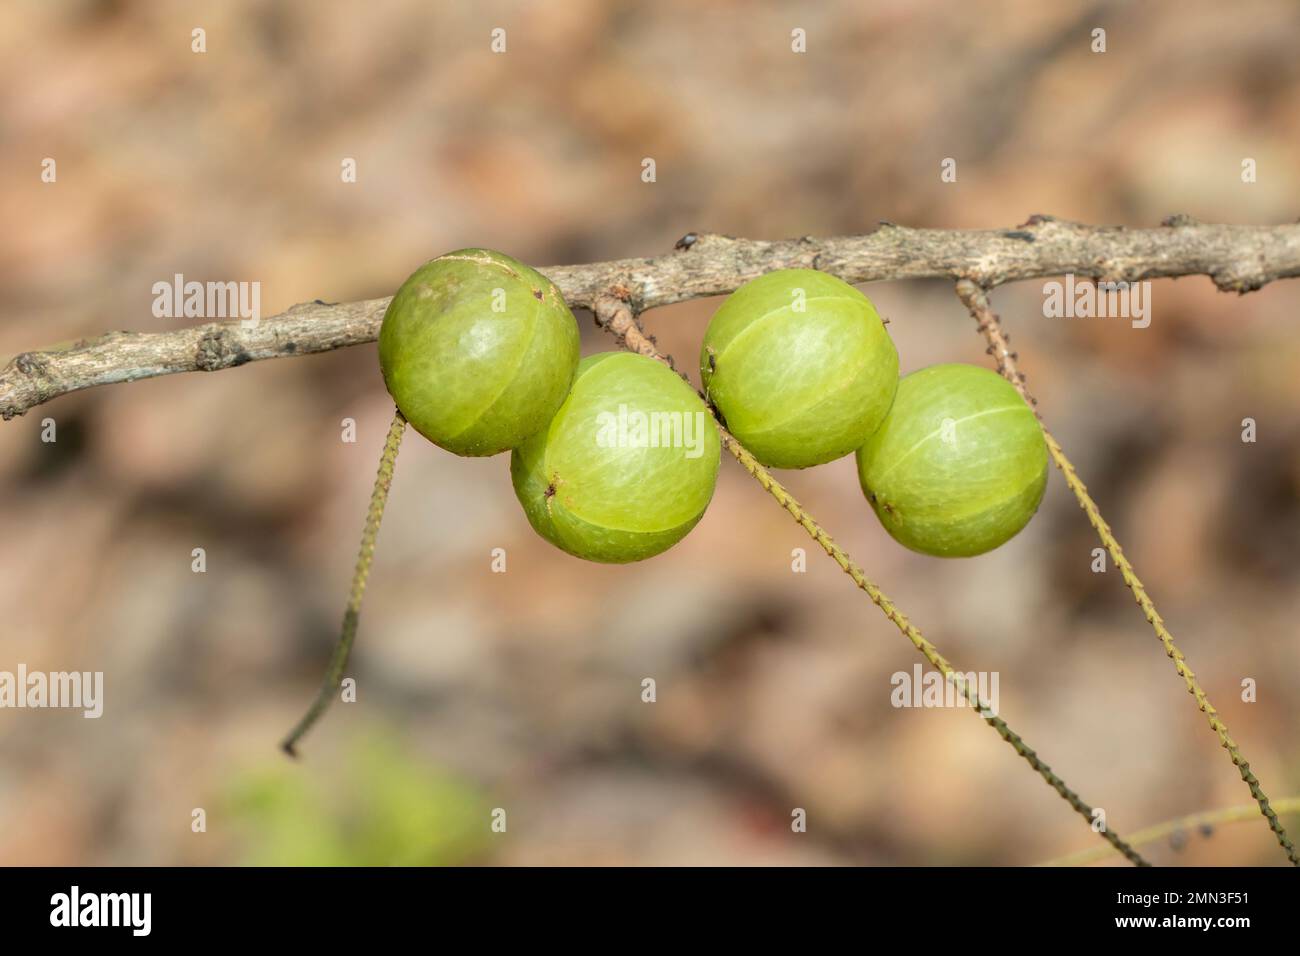 Image of fresh indian gooseberry on the tree. Green fruits that are high in vitamins. Stock Photo